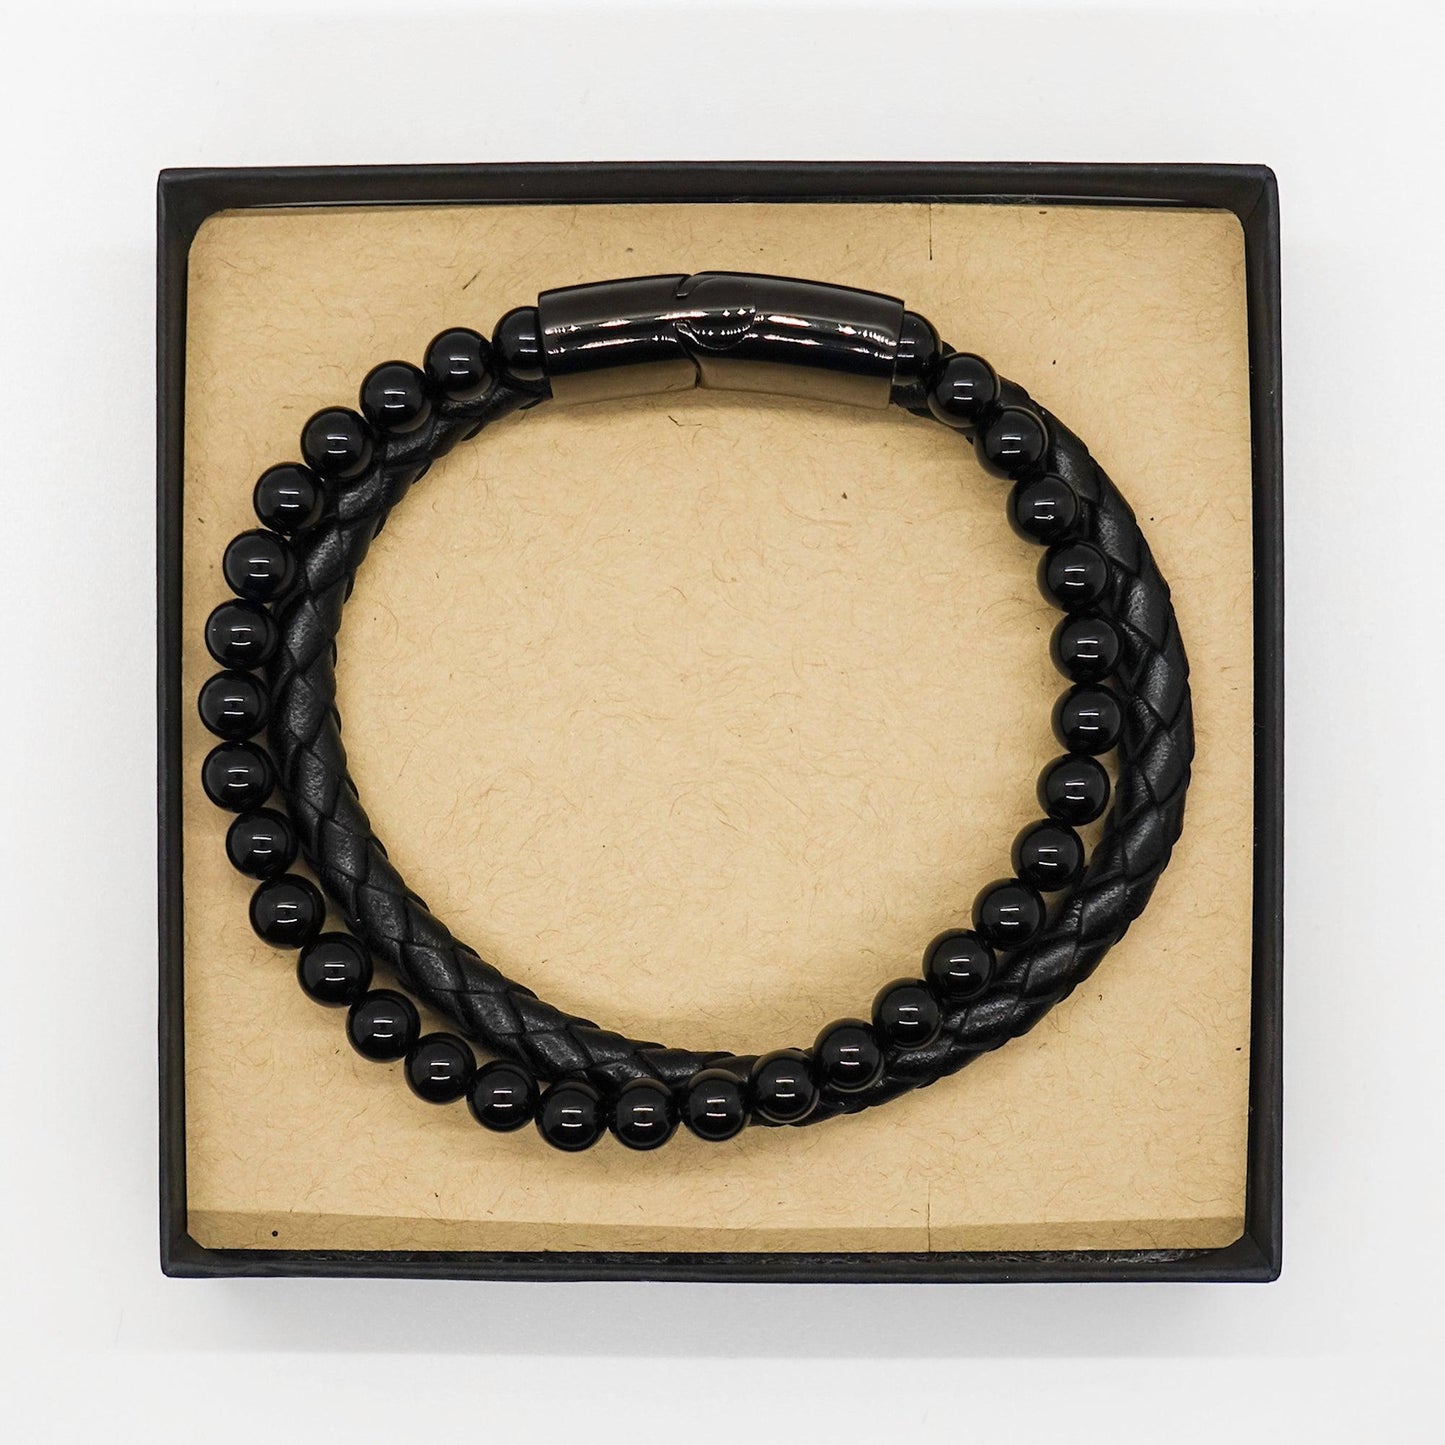 Coach Black Braided Stone Leather Bracelet - Thanks for being who you are - Birthday Christmas Jewelry Gifts Coworkers Colleague Boss - Mallard Moon Gift Shop